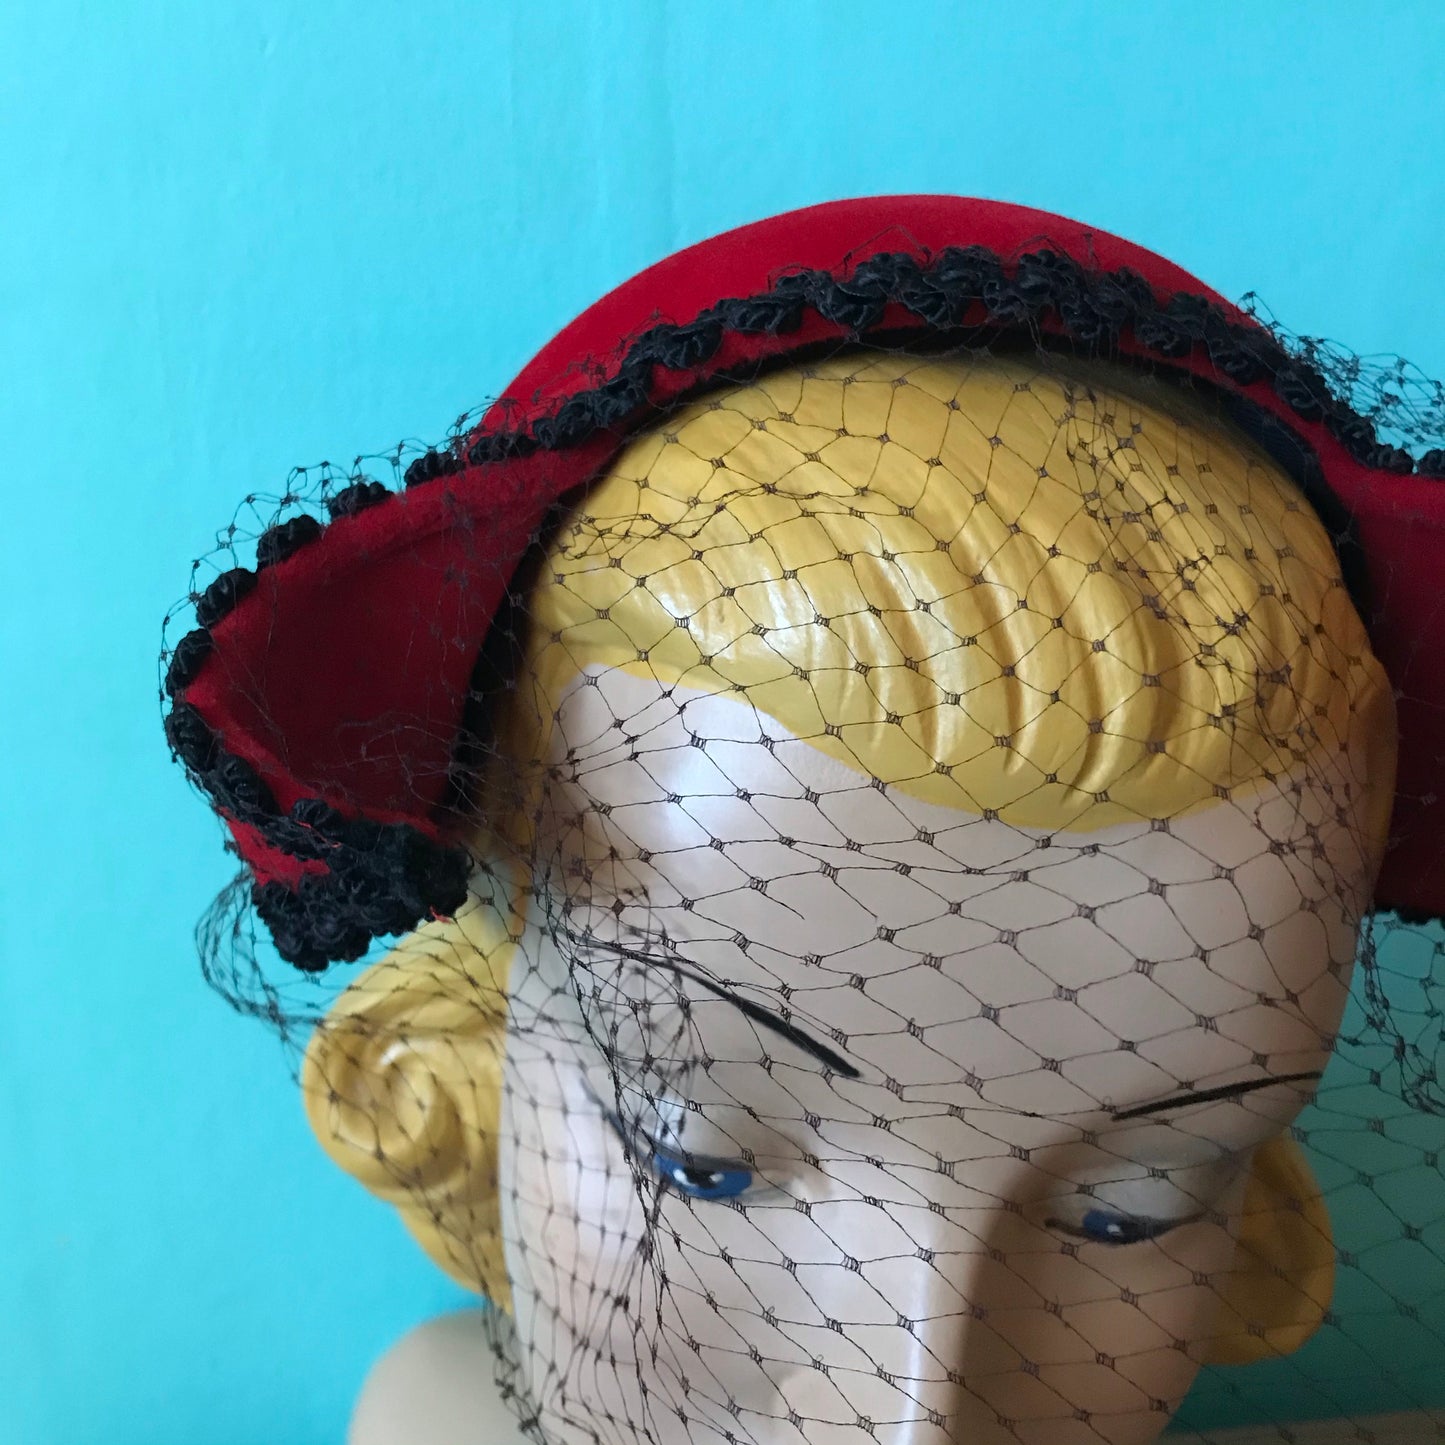 Molten Red Curled Devil Horn Veiled Cocktail Hat circa 1950s